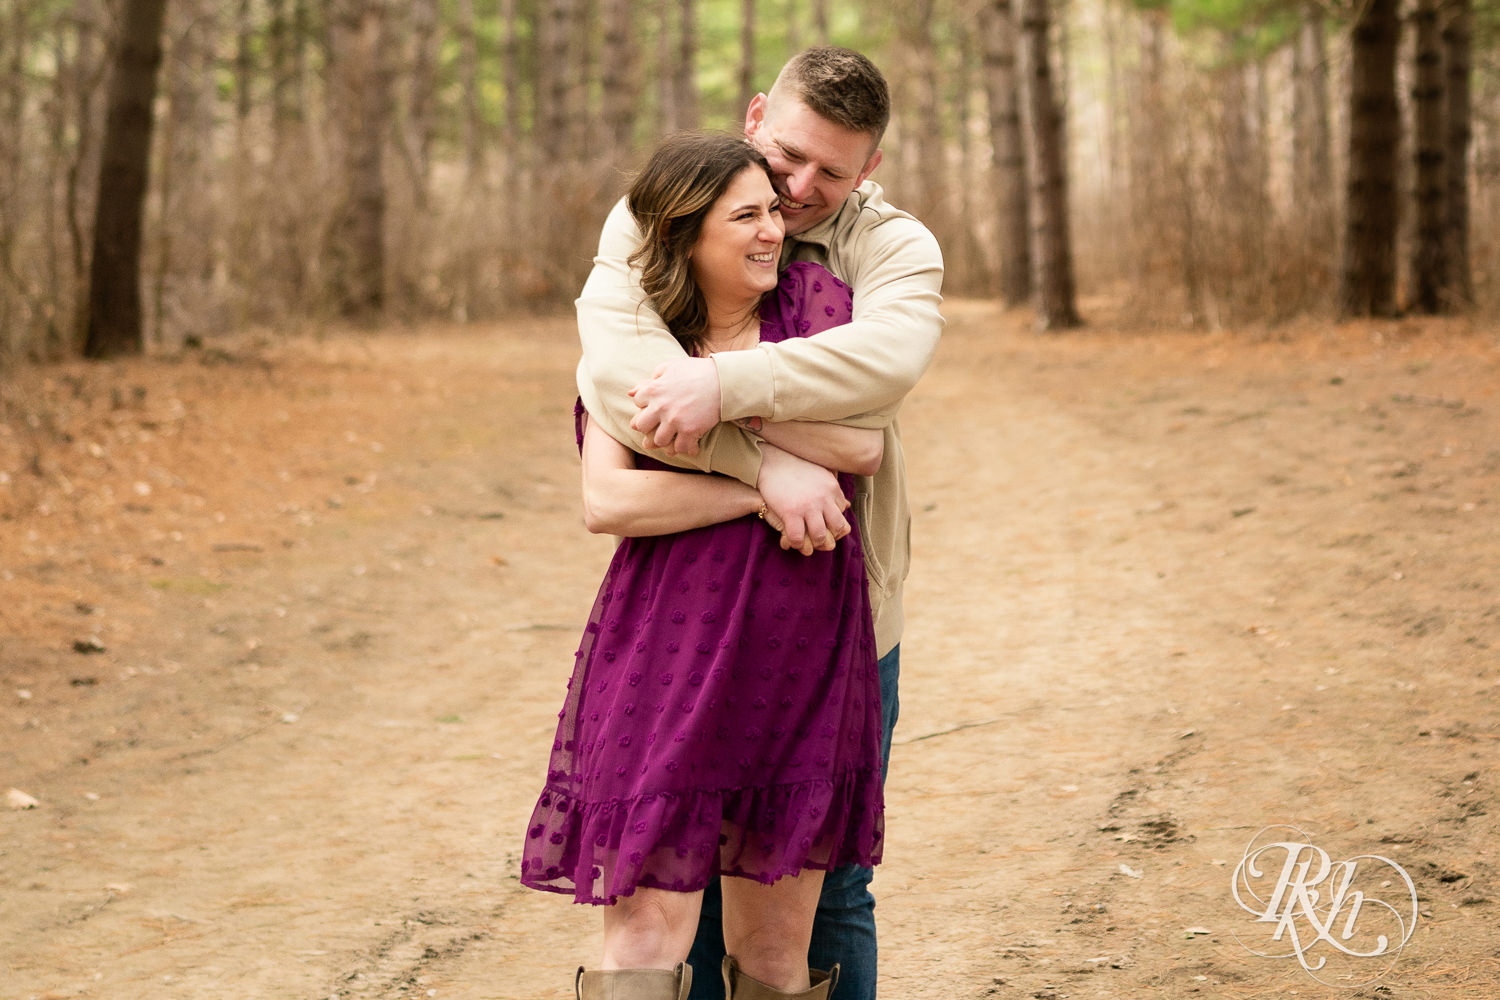 Man in jeans and woman in magenta dress laugh and hug in the woods in Lebanon Hills in Eagan, Minnesota.